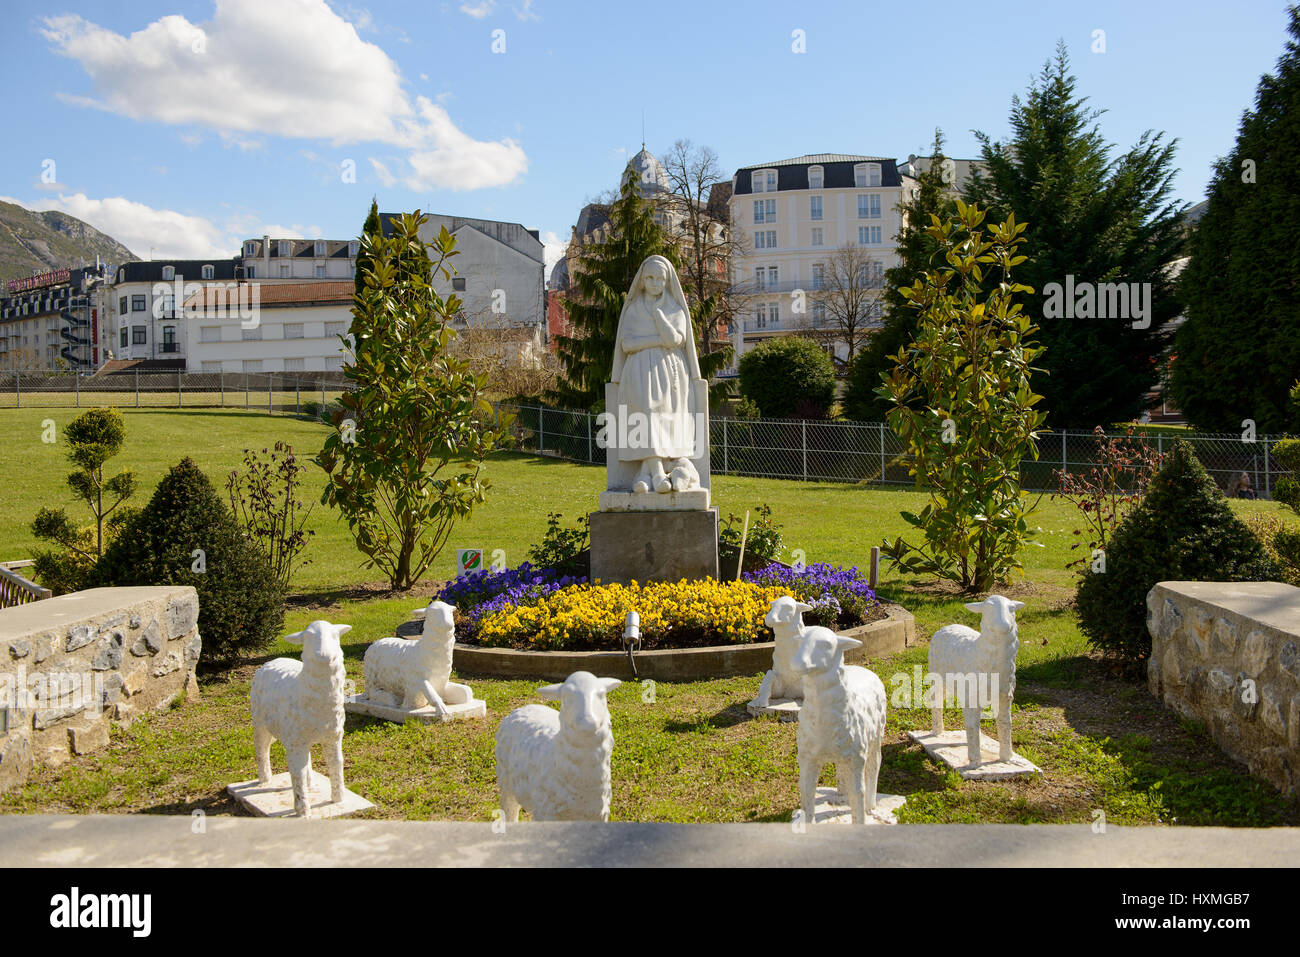 A statue of Our Lady of Lourdes Stock Photo, Royalty Free Image ...